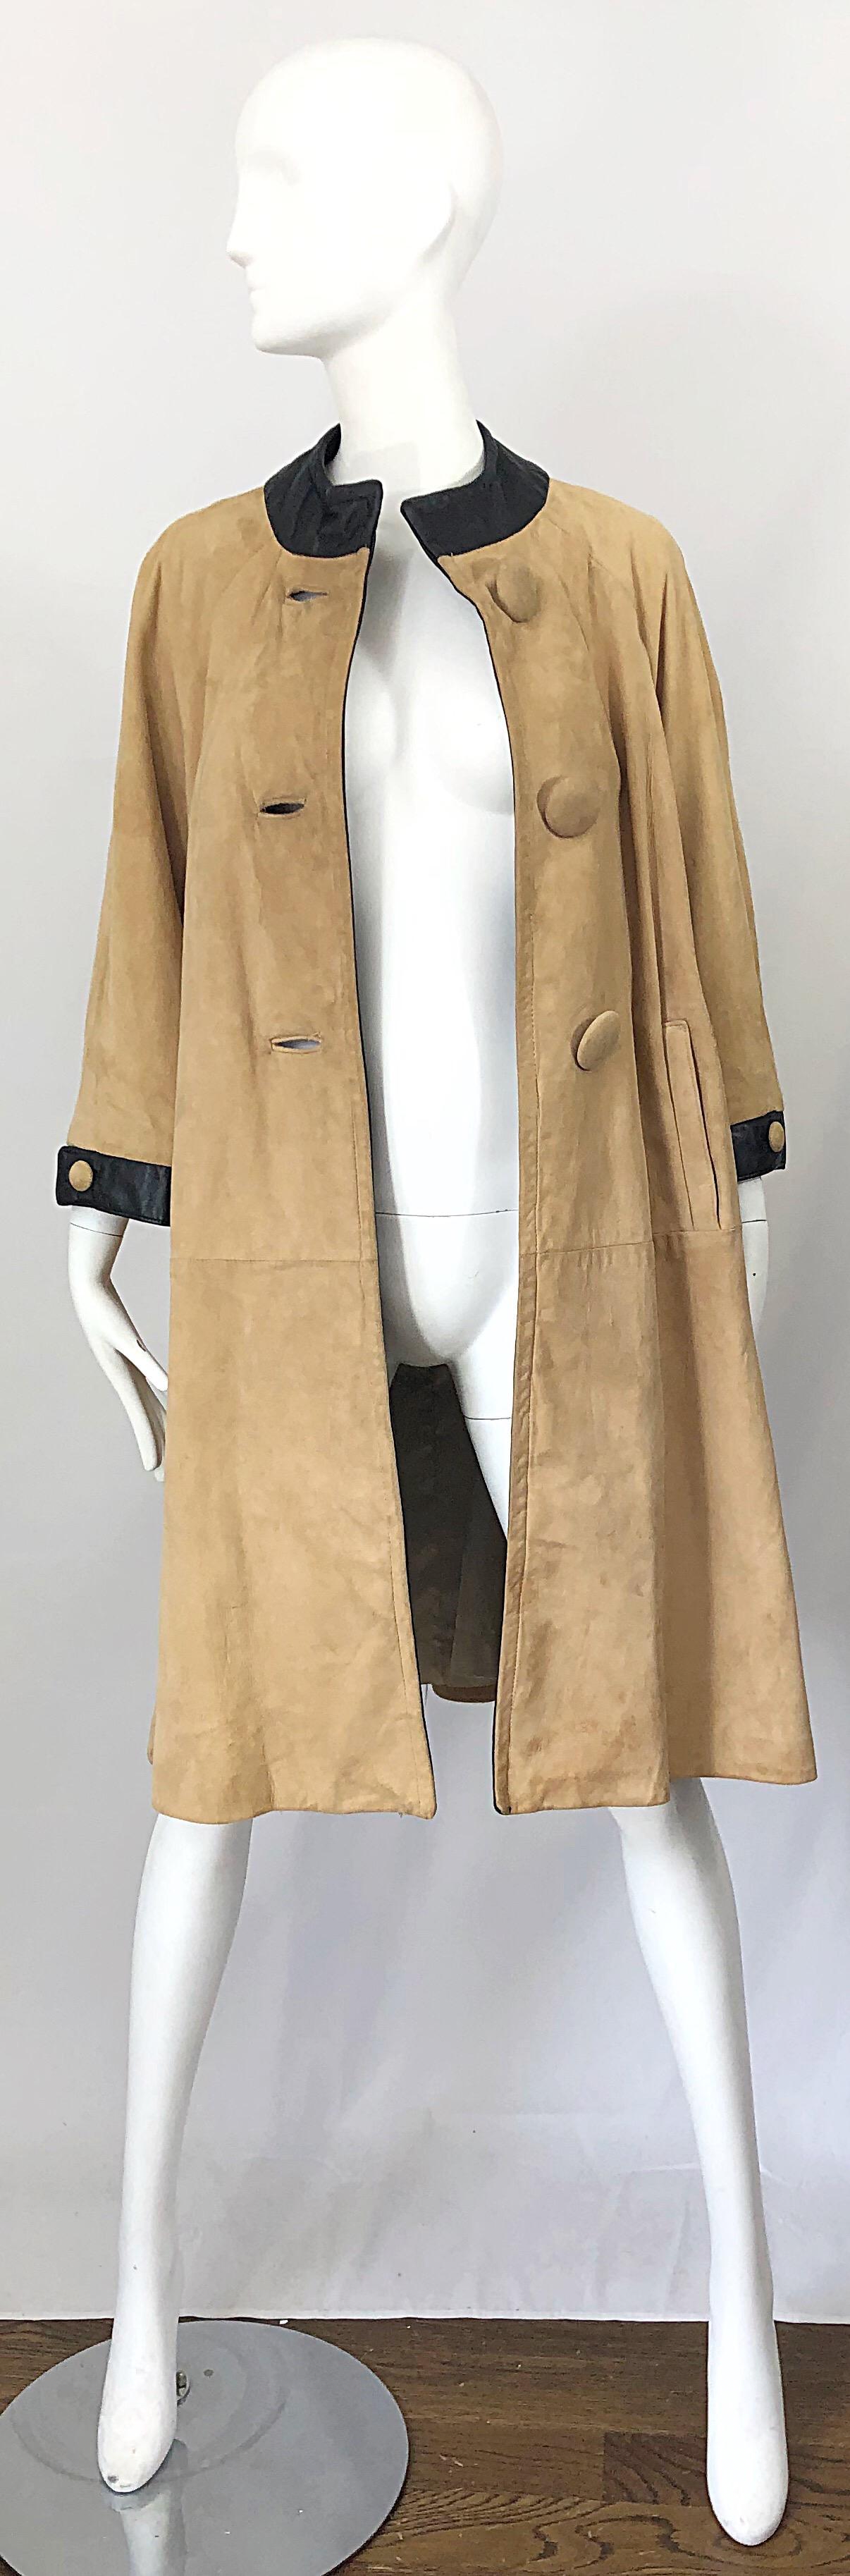 1960s Lillie Rubin Tan + Black Suede and Leather Vintage 60s Swing Jacket Coat 4